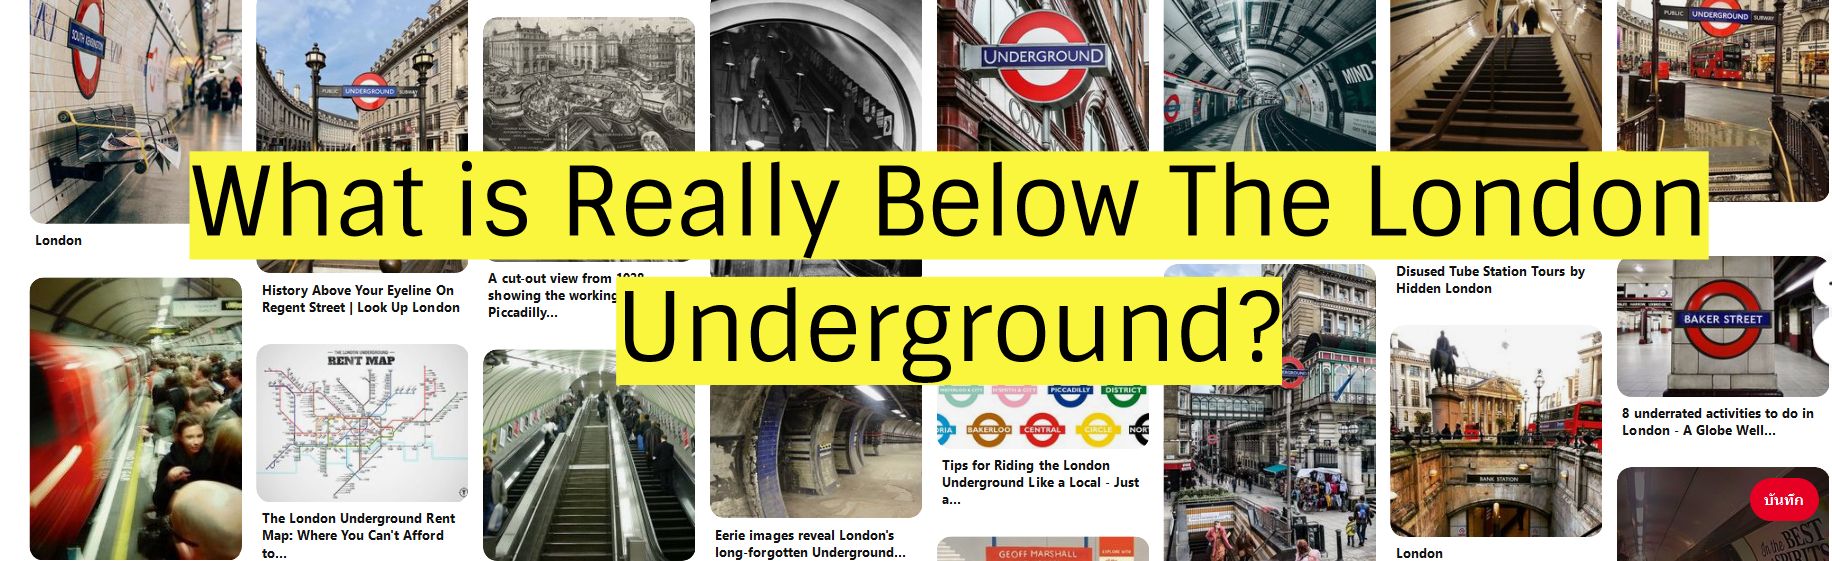 What is Really Below The London Underground?